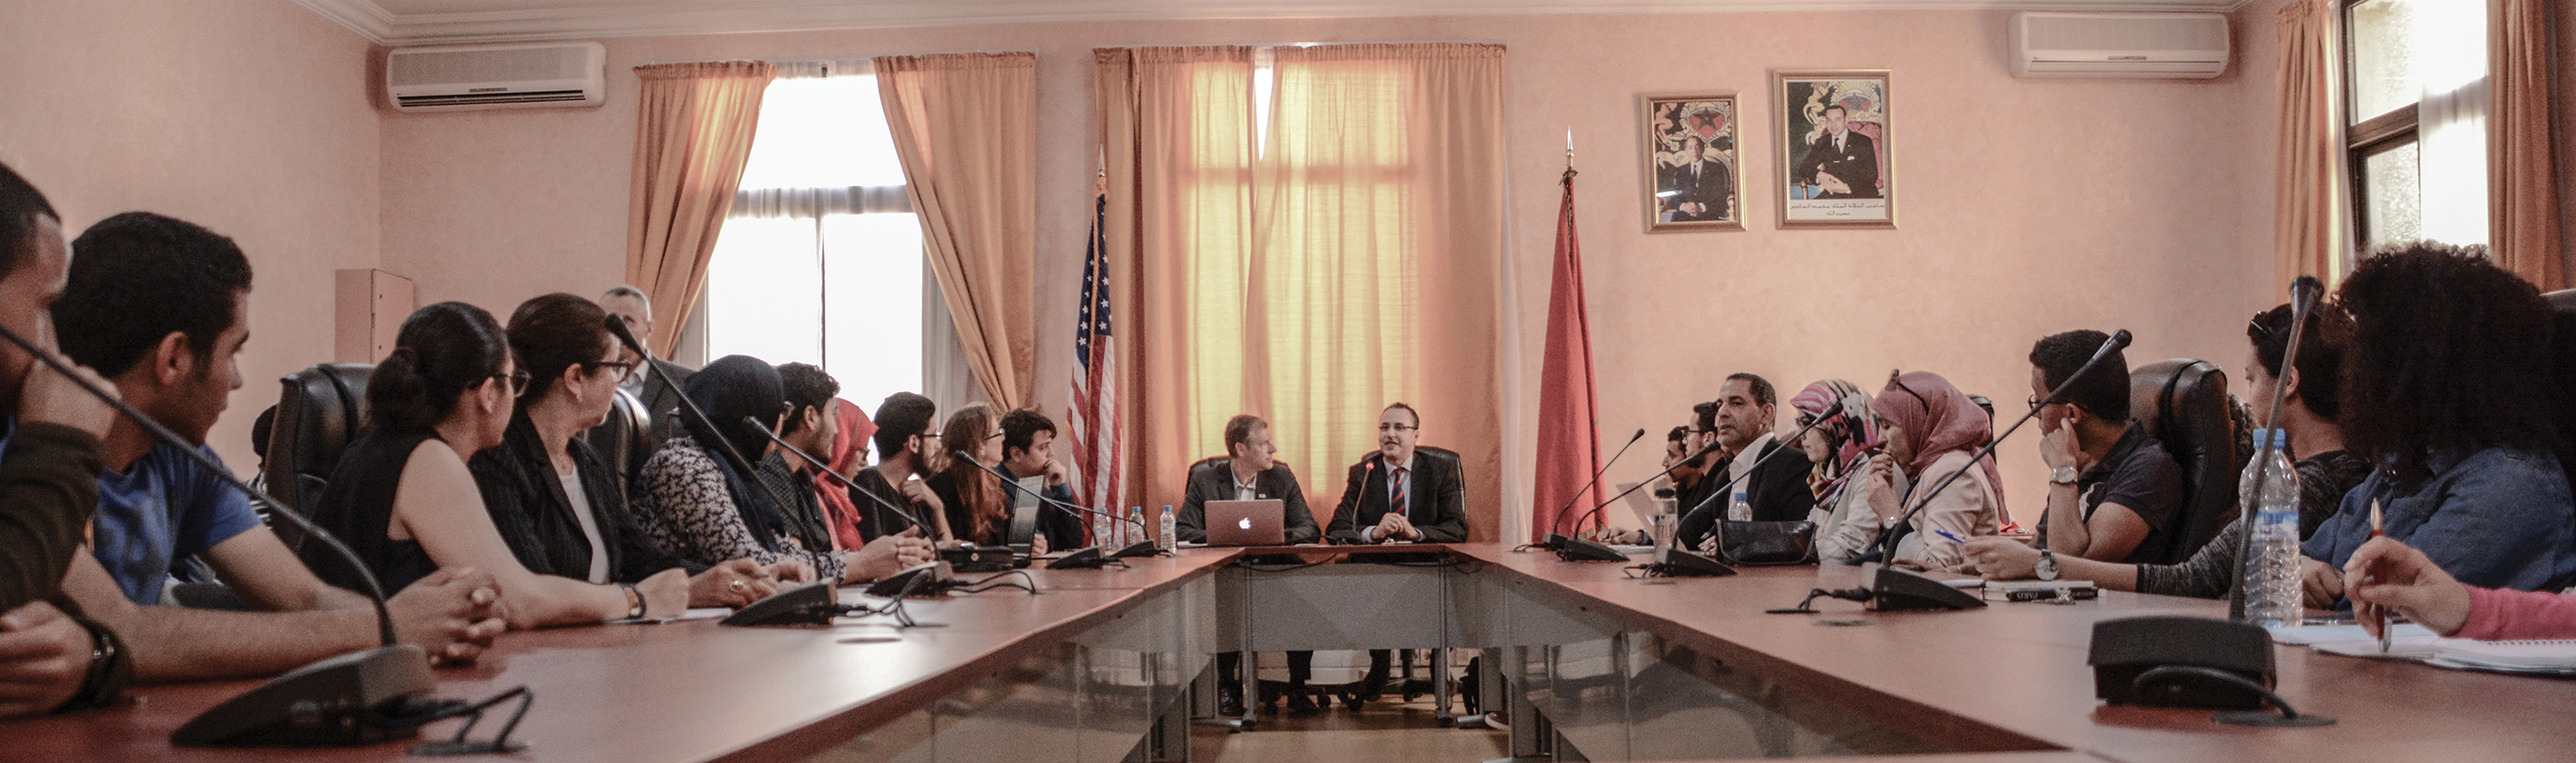 Kammen meets with the dean and students in the School of Information in Morocco